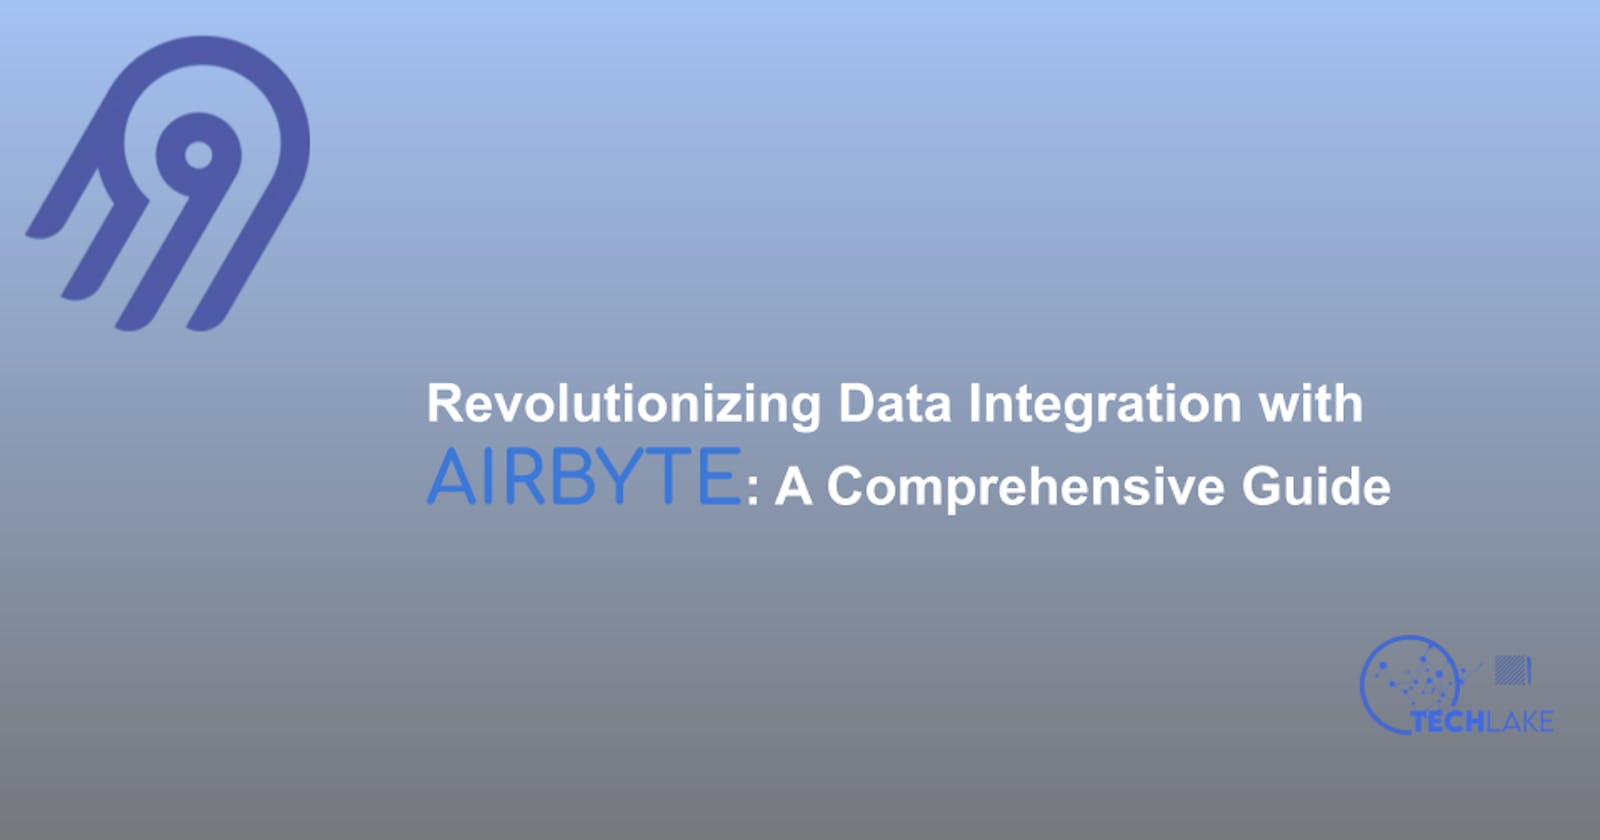 Revolutionizing Data Integration with Airbyte: A Comprehensive Guide